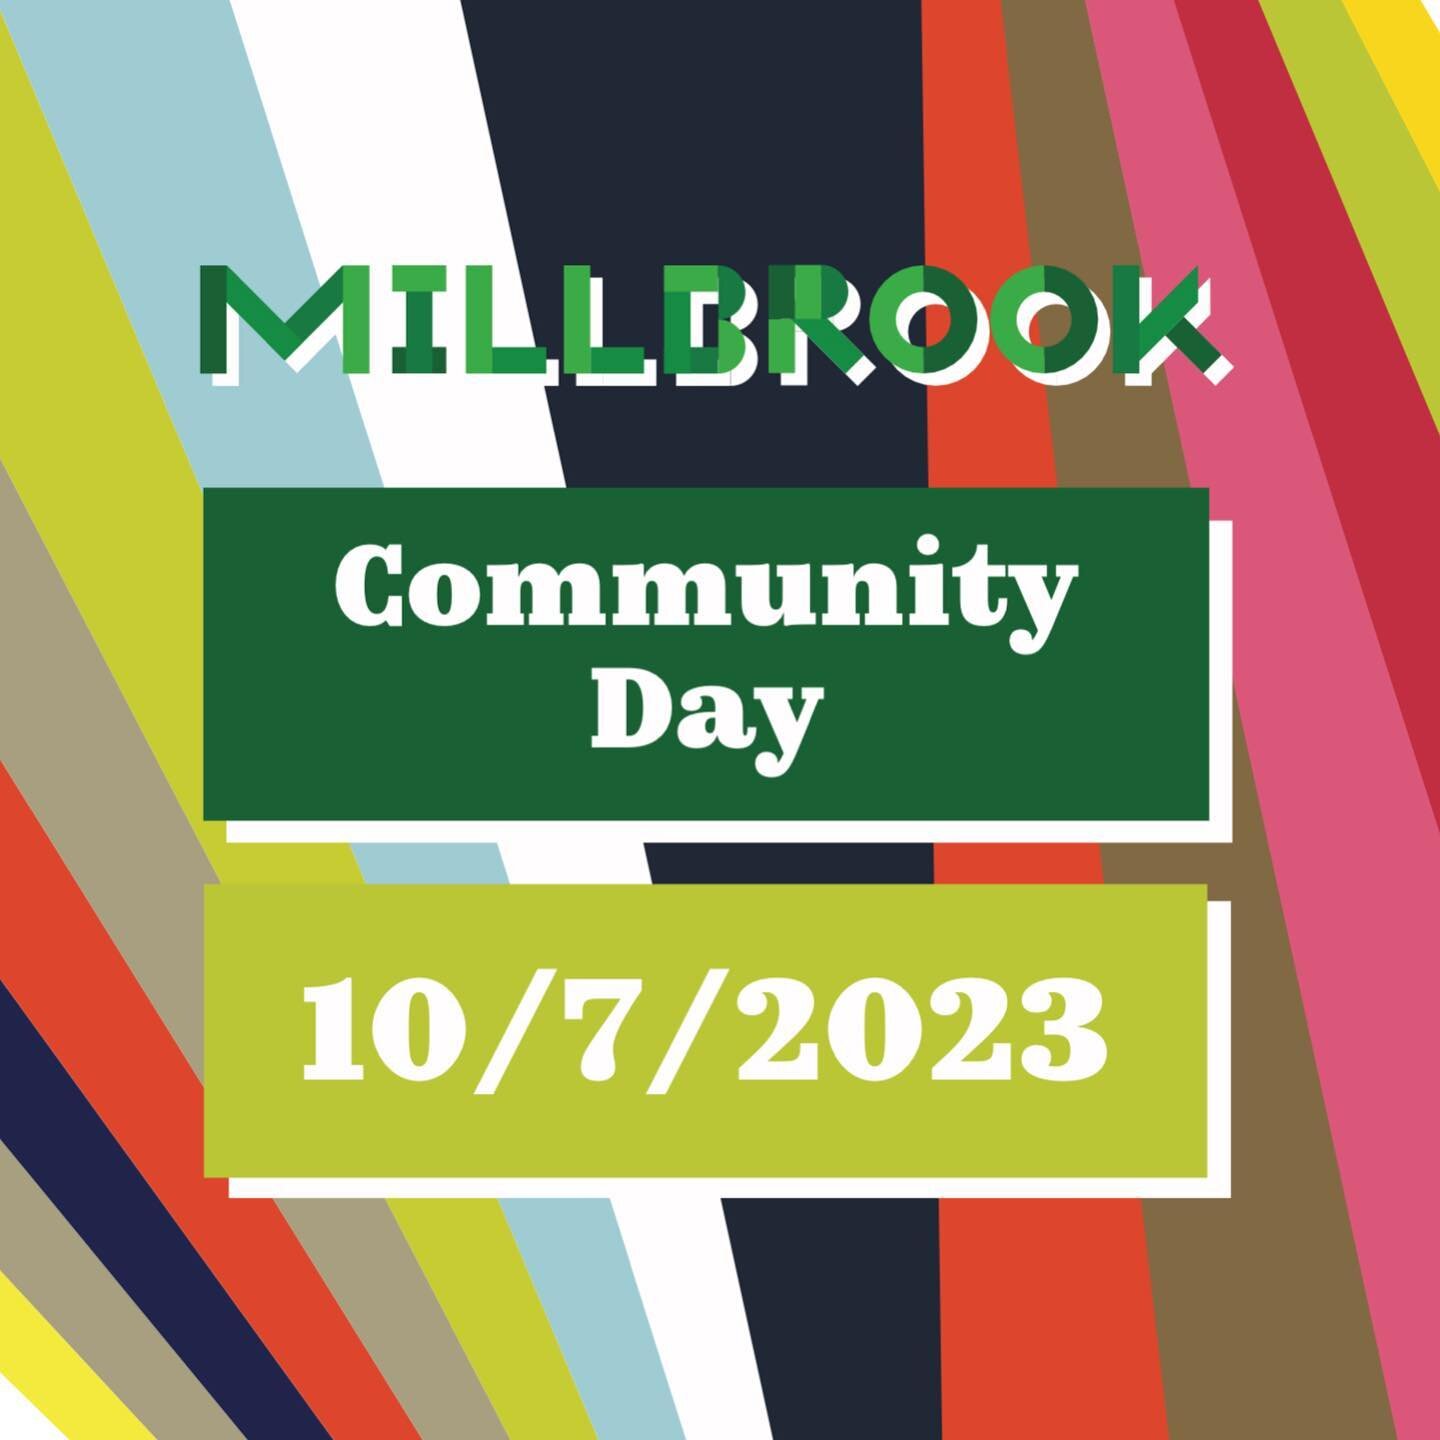 Millbrook Community Day &mdash; October 17th. 
There will be activities throughout Millbrook including the @millbrookfarmersmarket moving up to Church Street for the day, a Chili Cook-Off and a bubble bus @millbrooklibrary , music provided by @millbr